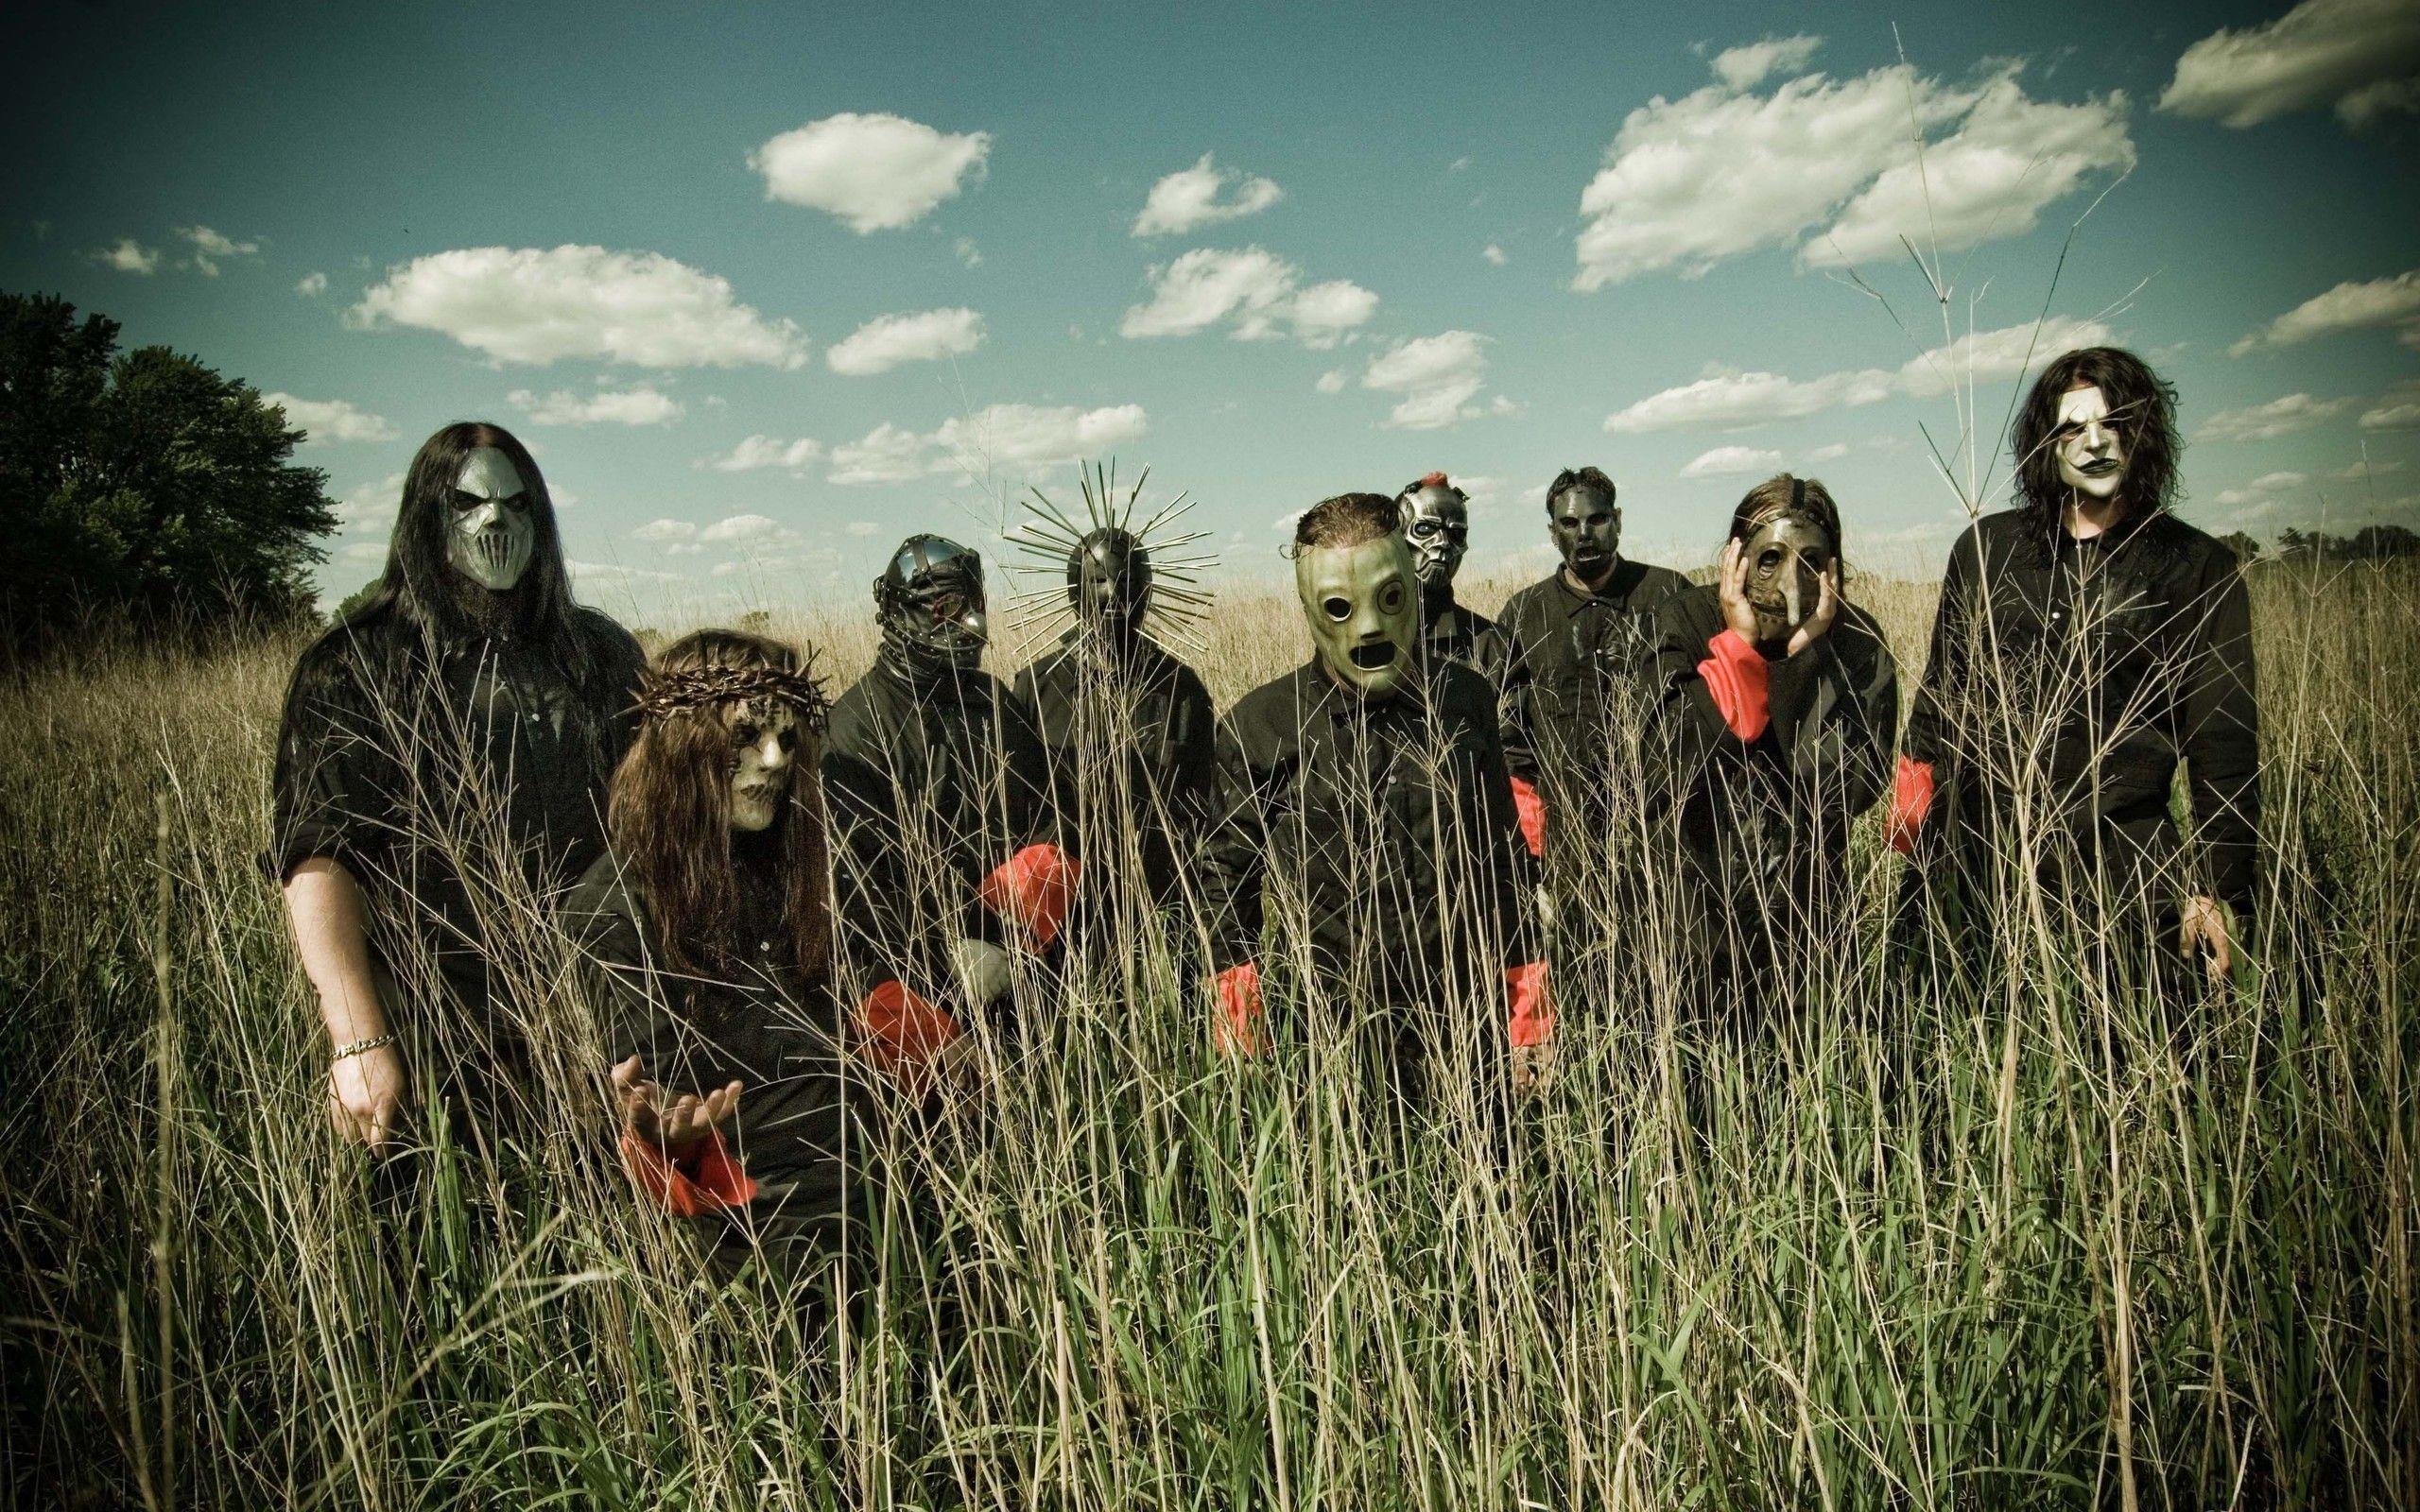 Download the Slipknot In The Weeds Wallpaper, Slipknot In The Weeds